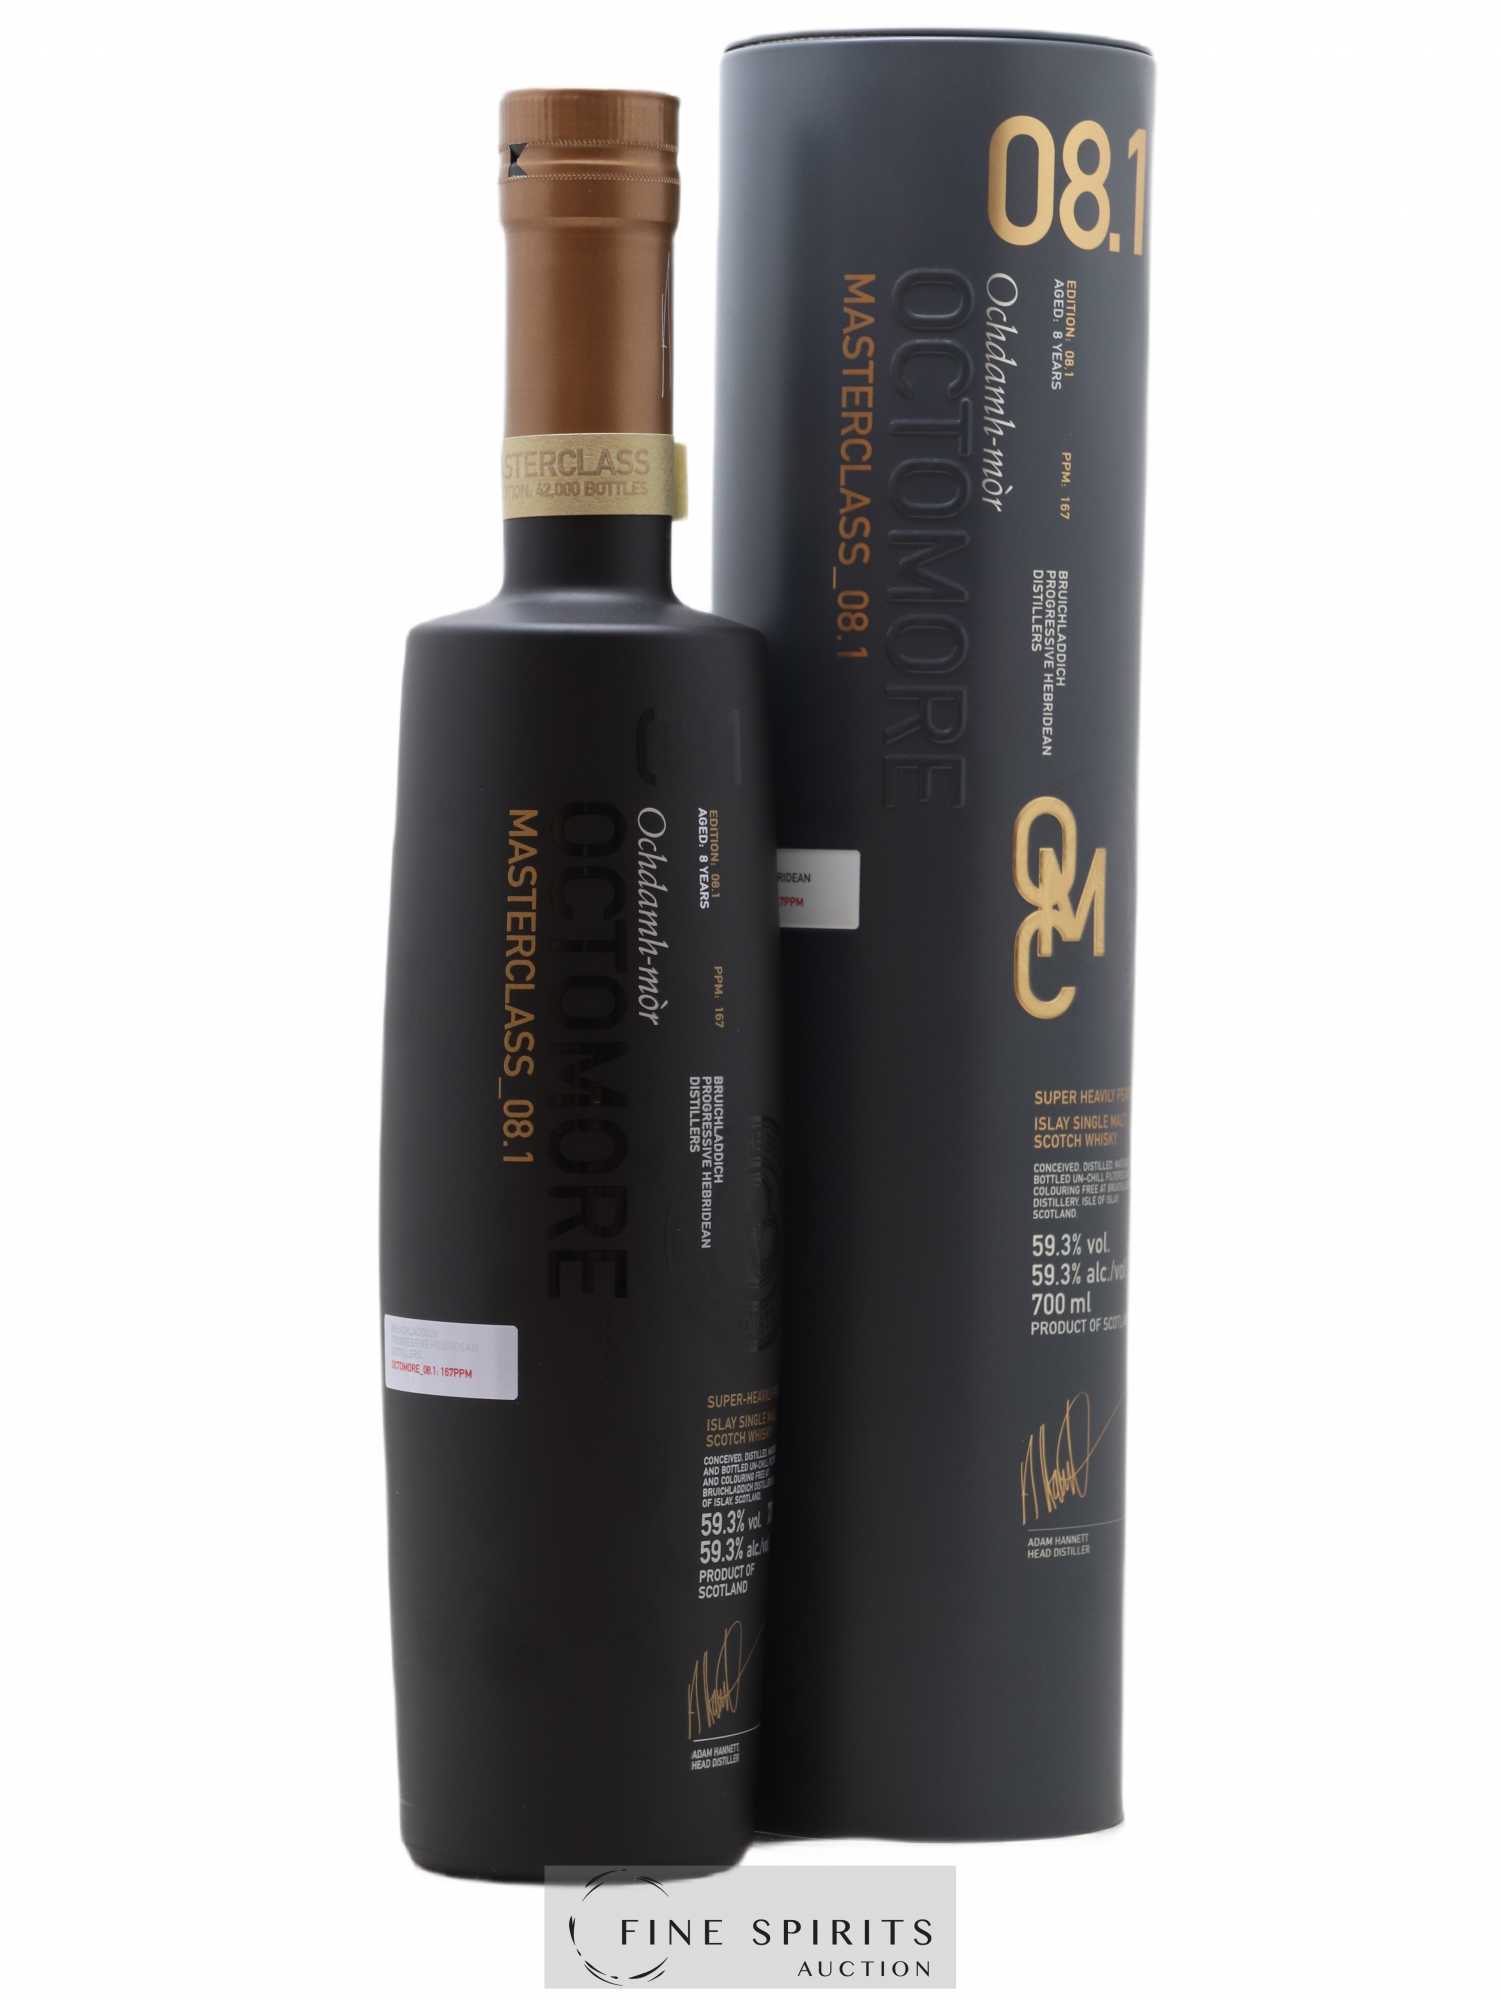 Octomore 8 years Of. Masterclass Edition 08.1 Super-Heavily Peated - One of 42000 Limited Edition 